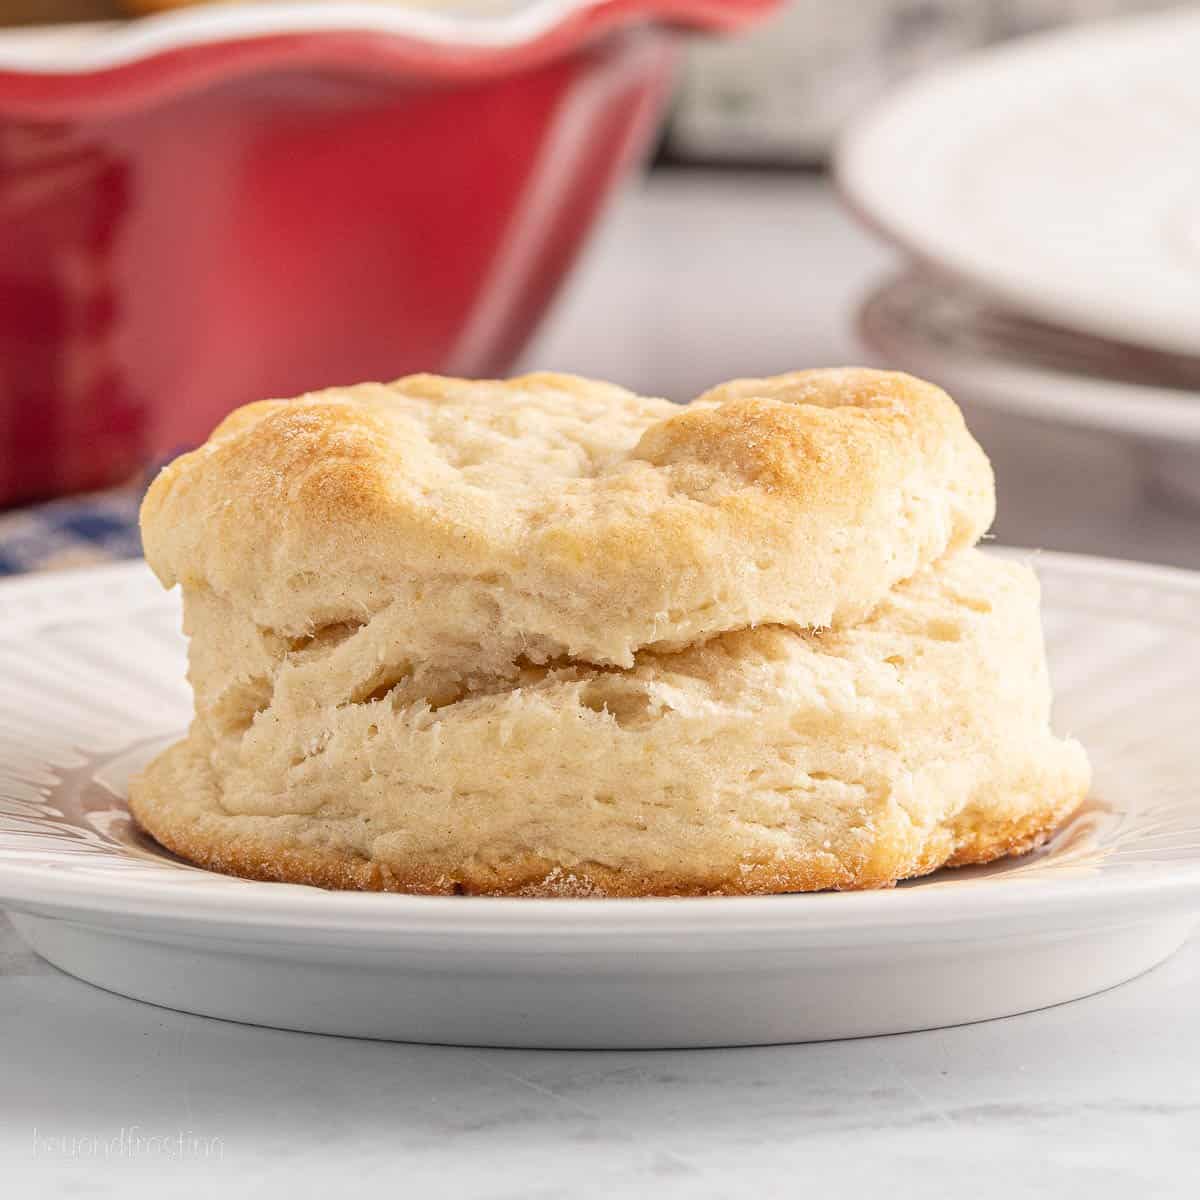 https://beyondfrosting.com/wp-content/uploads/2022/08/7UP-Biscuits-15-2.jpg